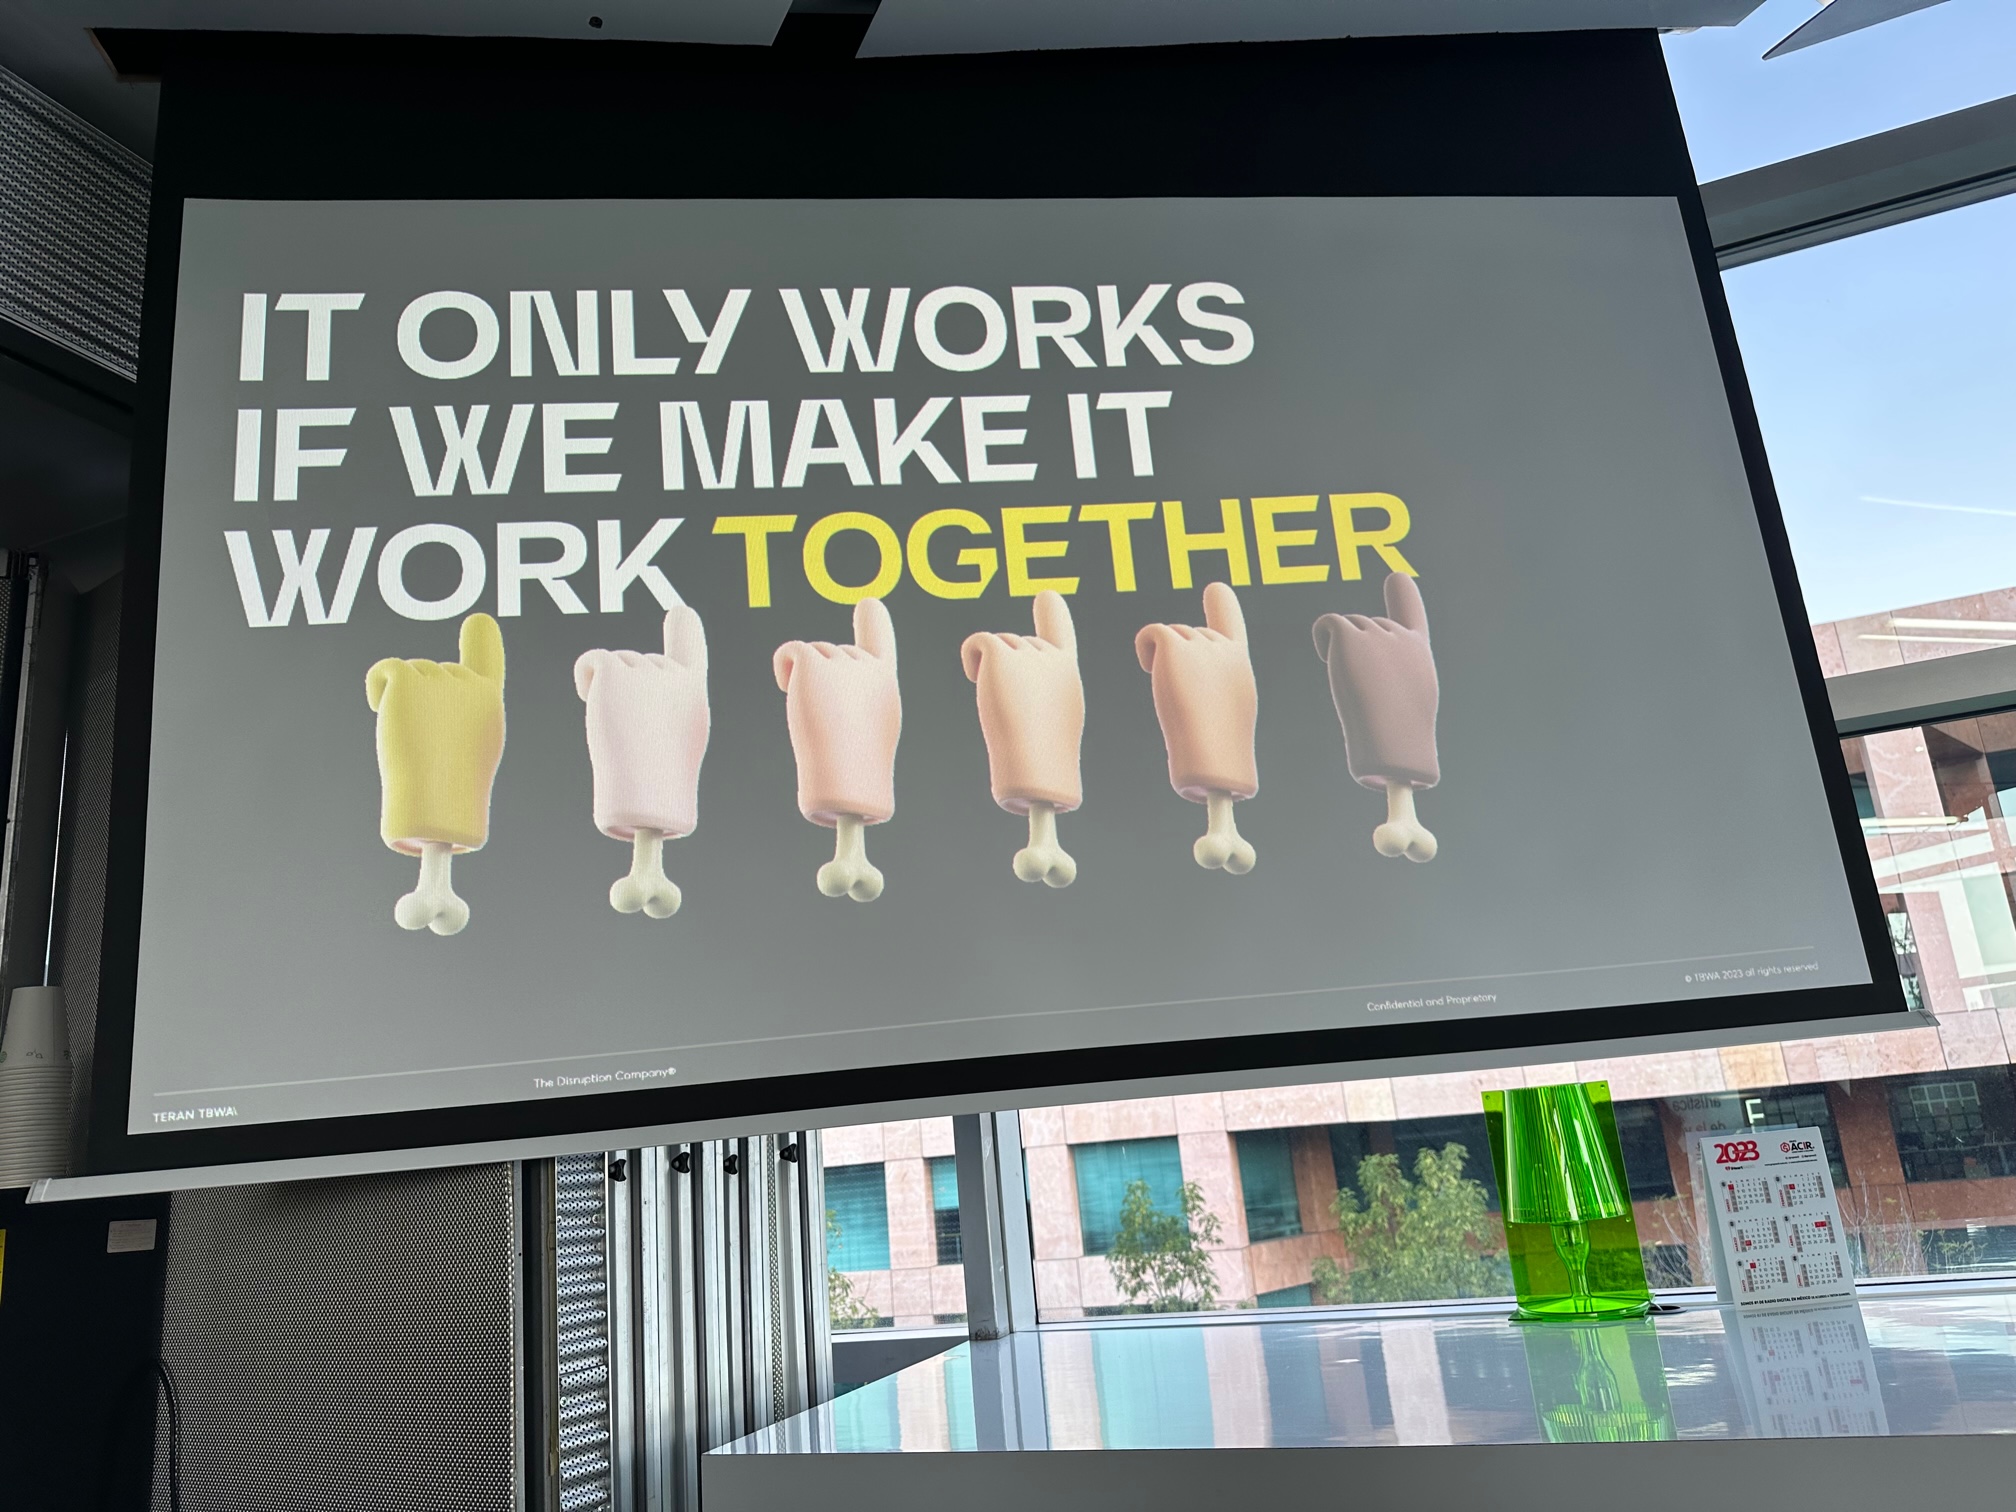 TBWA launched "Collective" in Mexico